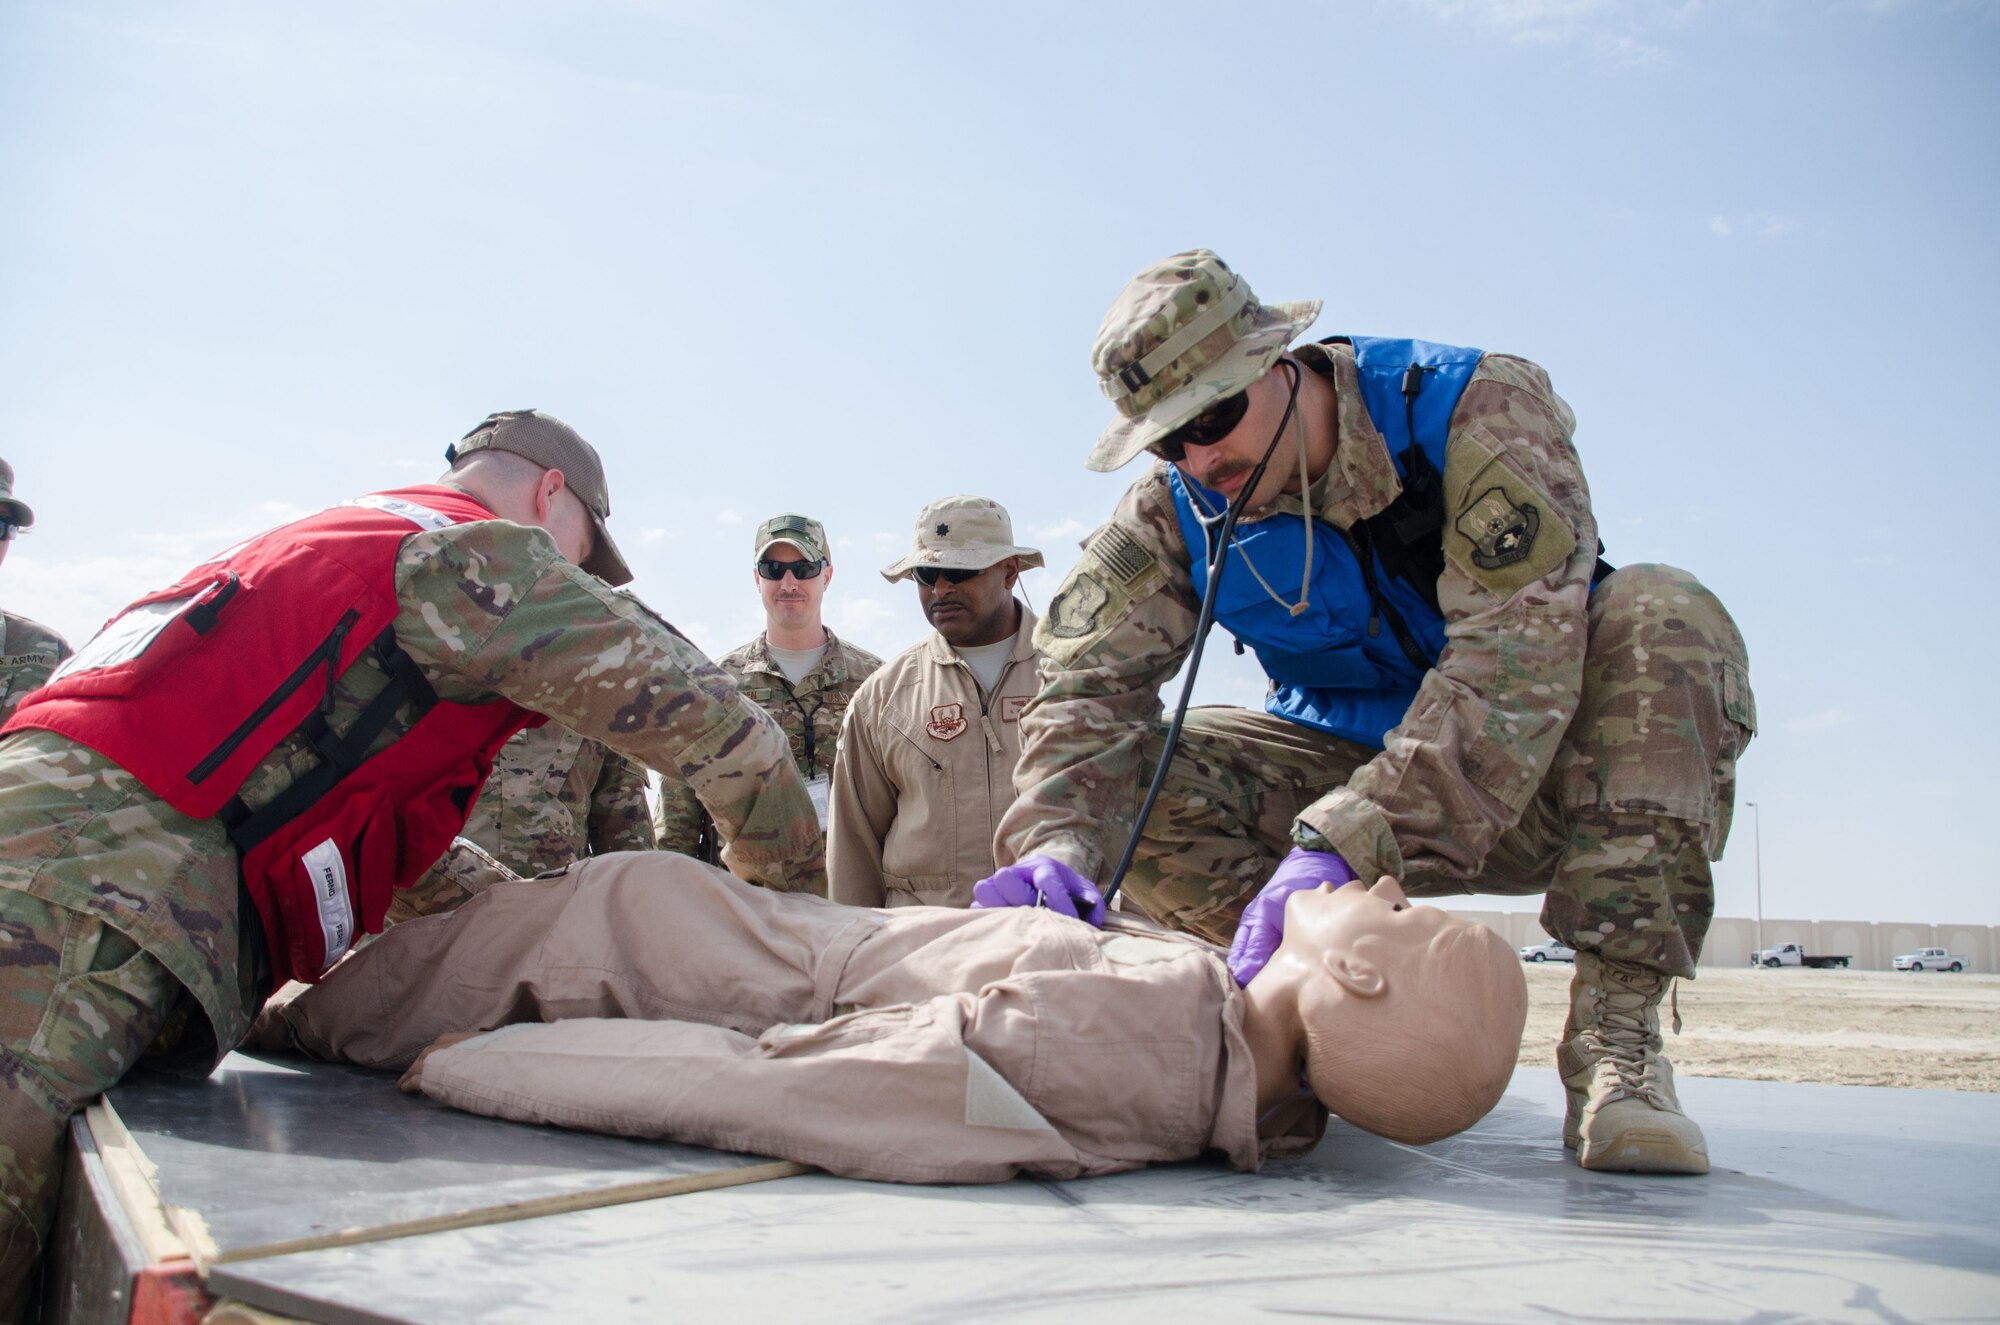 Members from the 380th Expeditionary Medical Squadron, responds to an F-22 Raptor crash during the Major Accident Response Exercise at Al Dhafra Air Base, United Arab Emirates Dec 15, 2017. Medical personnel were evaluated on protocol procedures involving injured, wounded and deceased service members. (U.S. Air National Guard Photo by Staff Sgt. Colton Elliott)